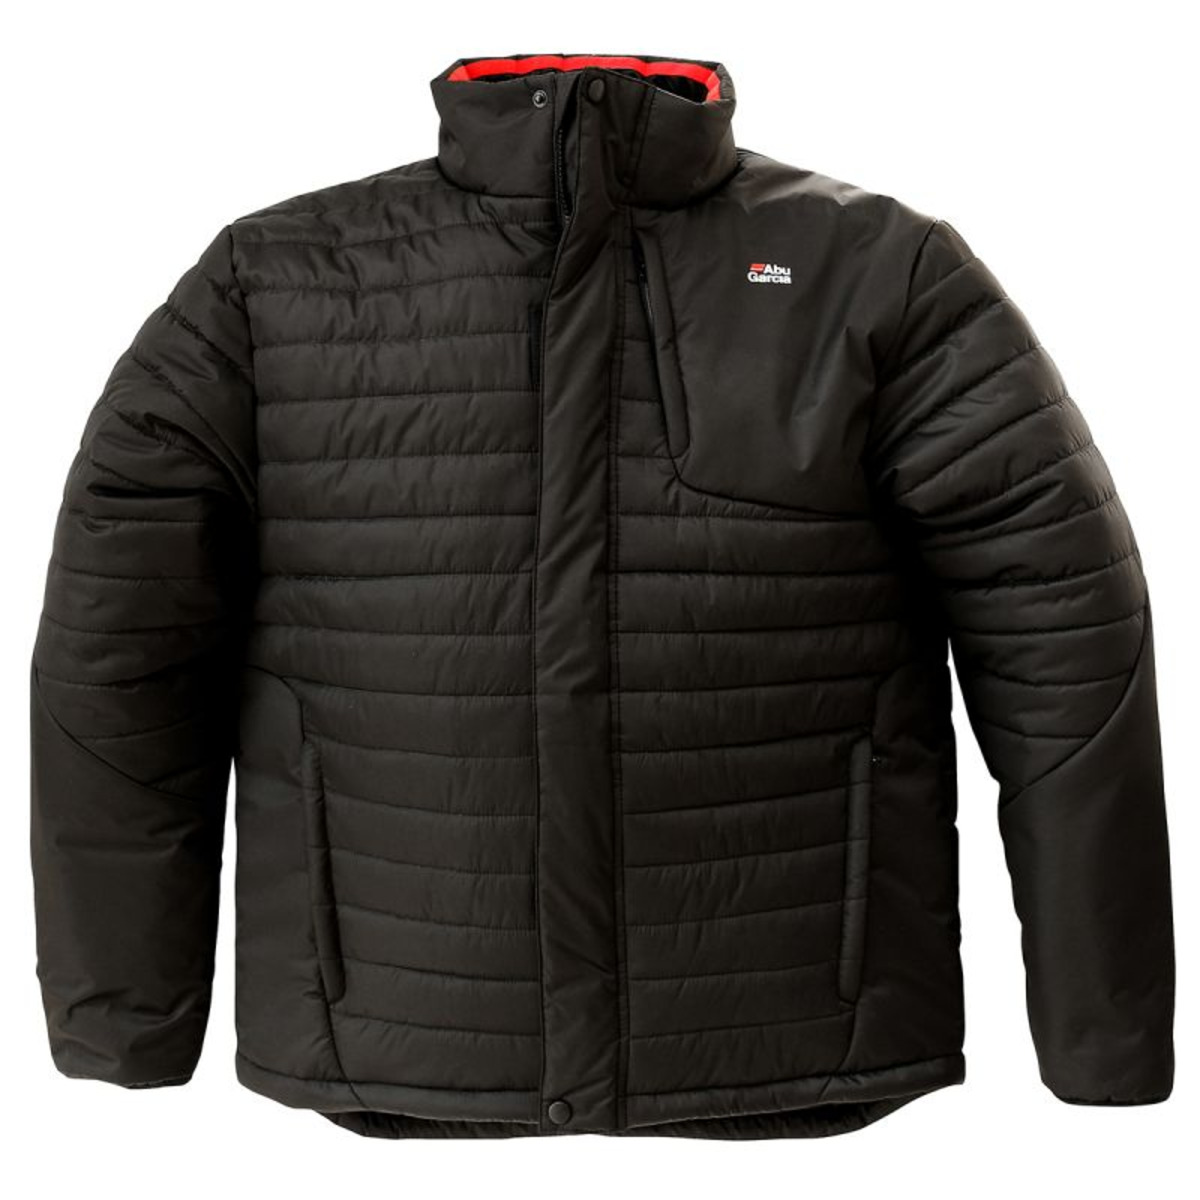 Abu Garcia Quilted Jacket - S